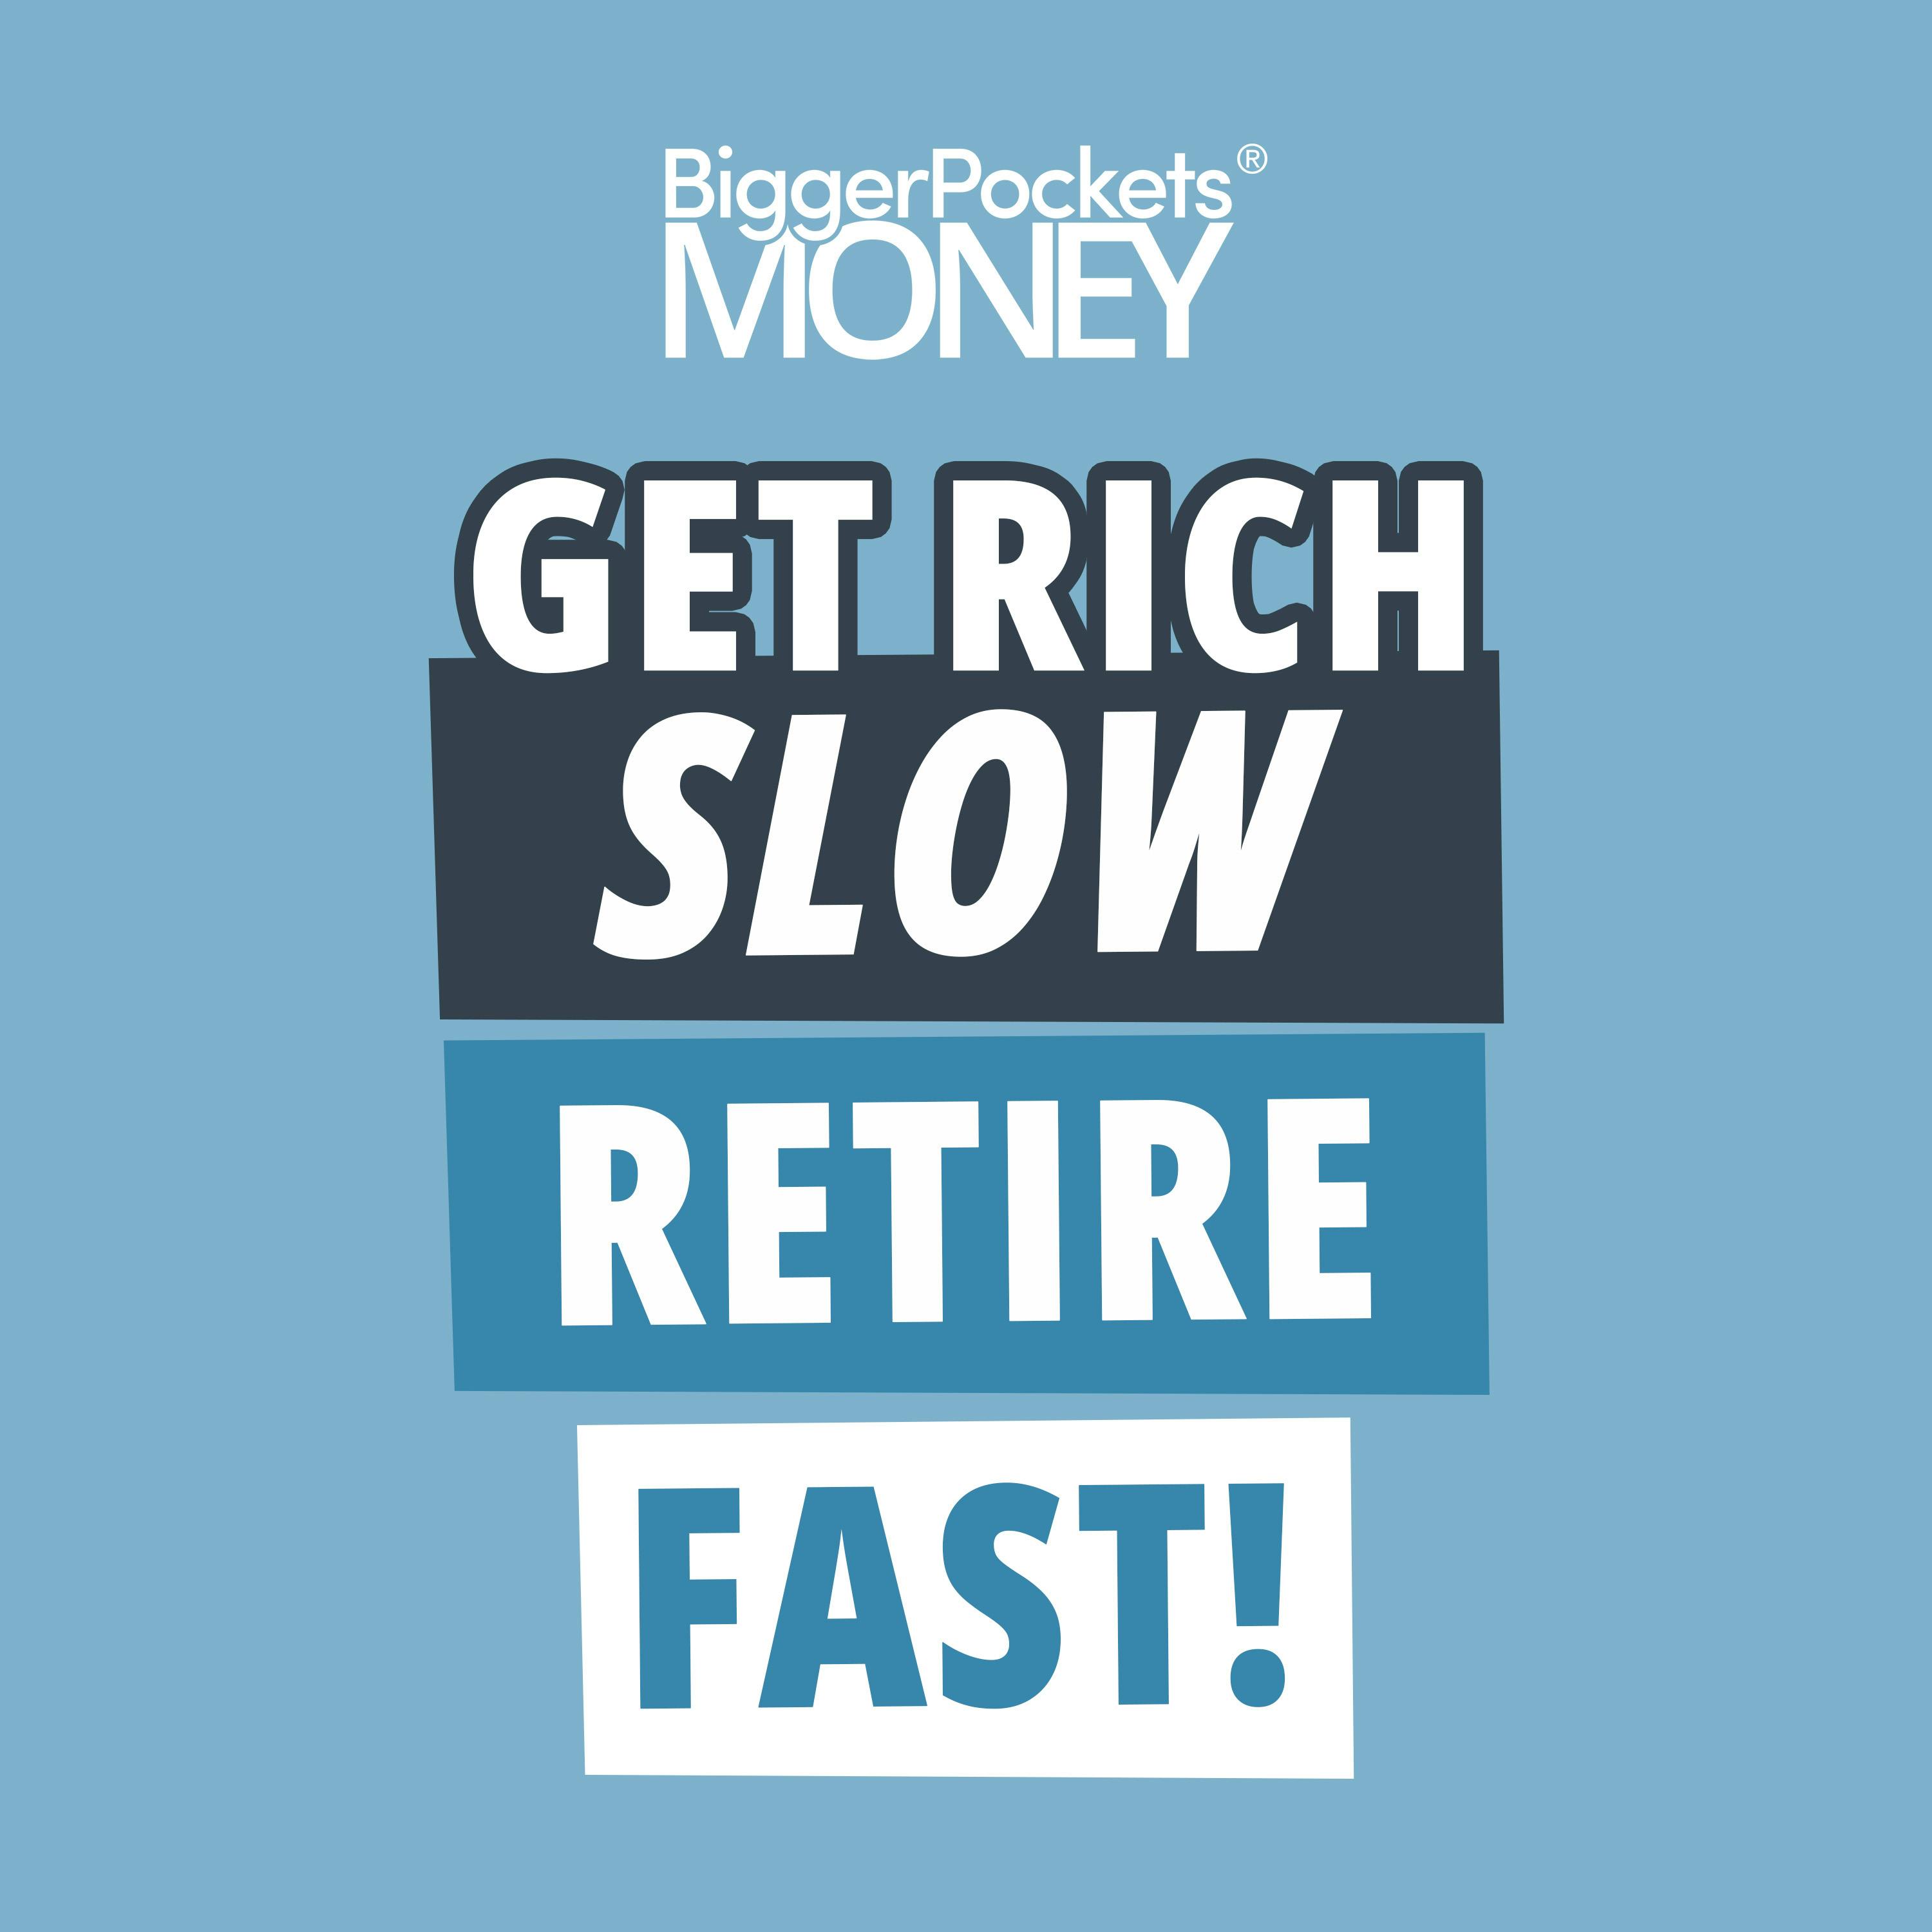 436: How to Get Rich Slowly and Retire Earlier Than Most with a Modest Portfolio